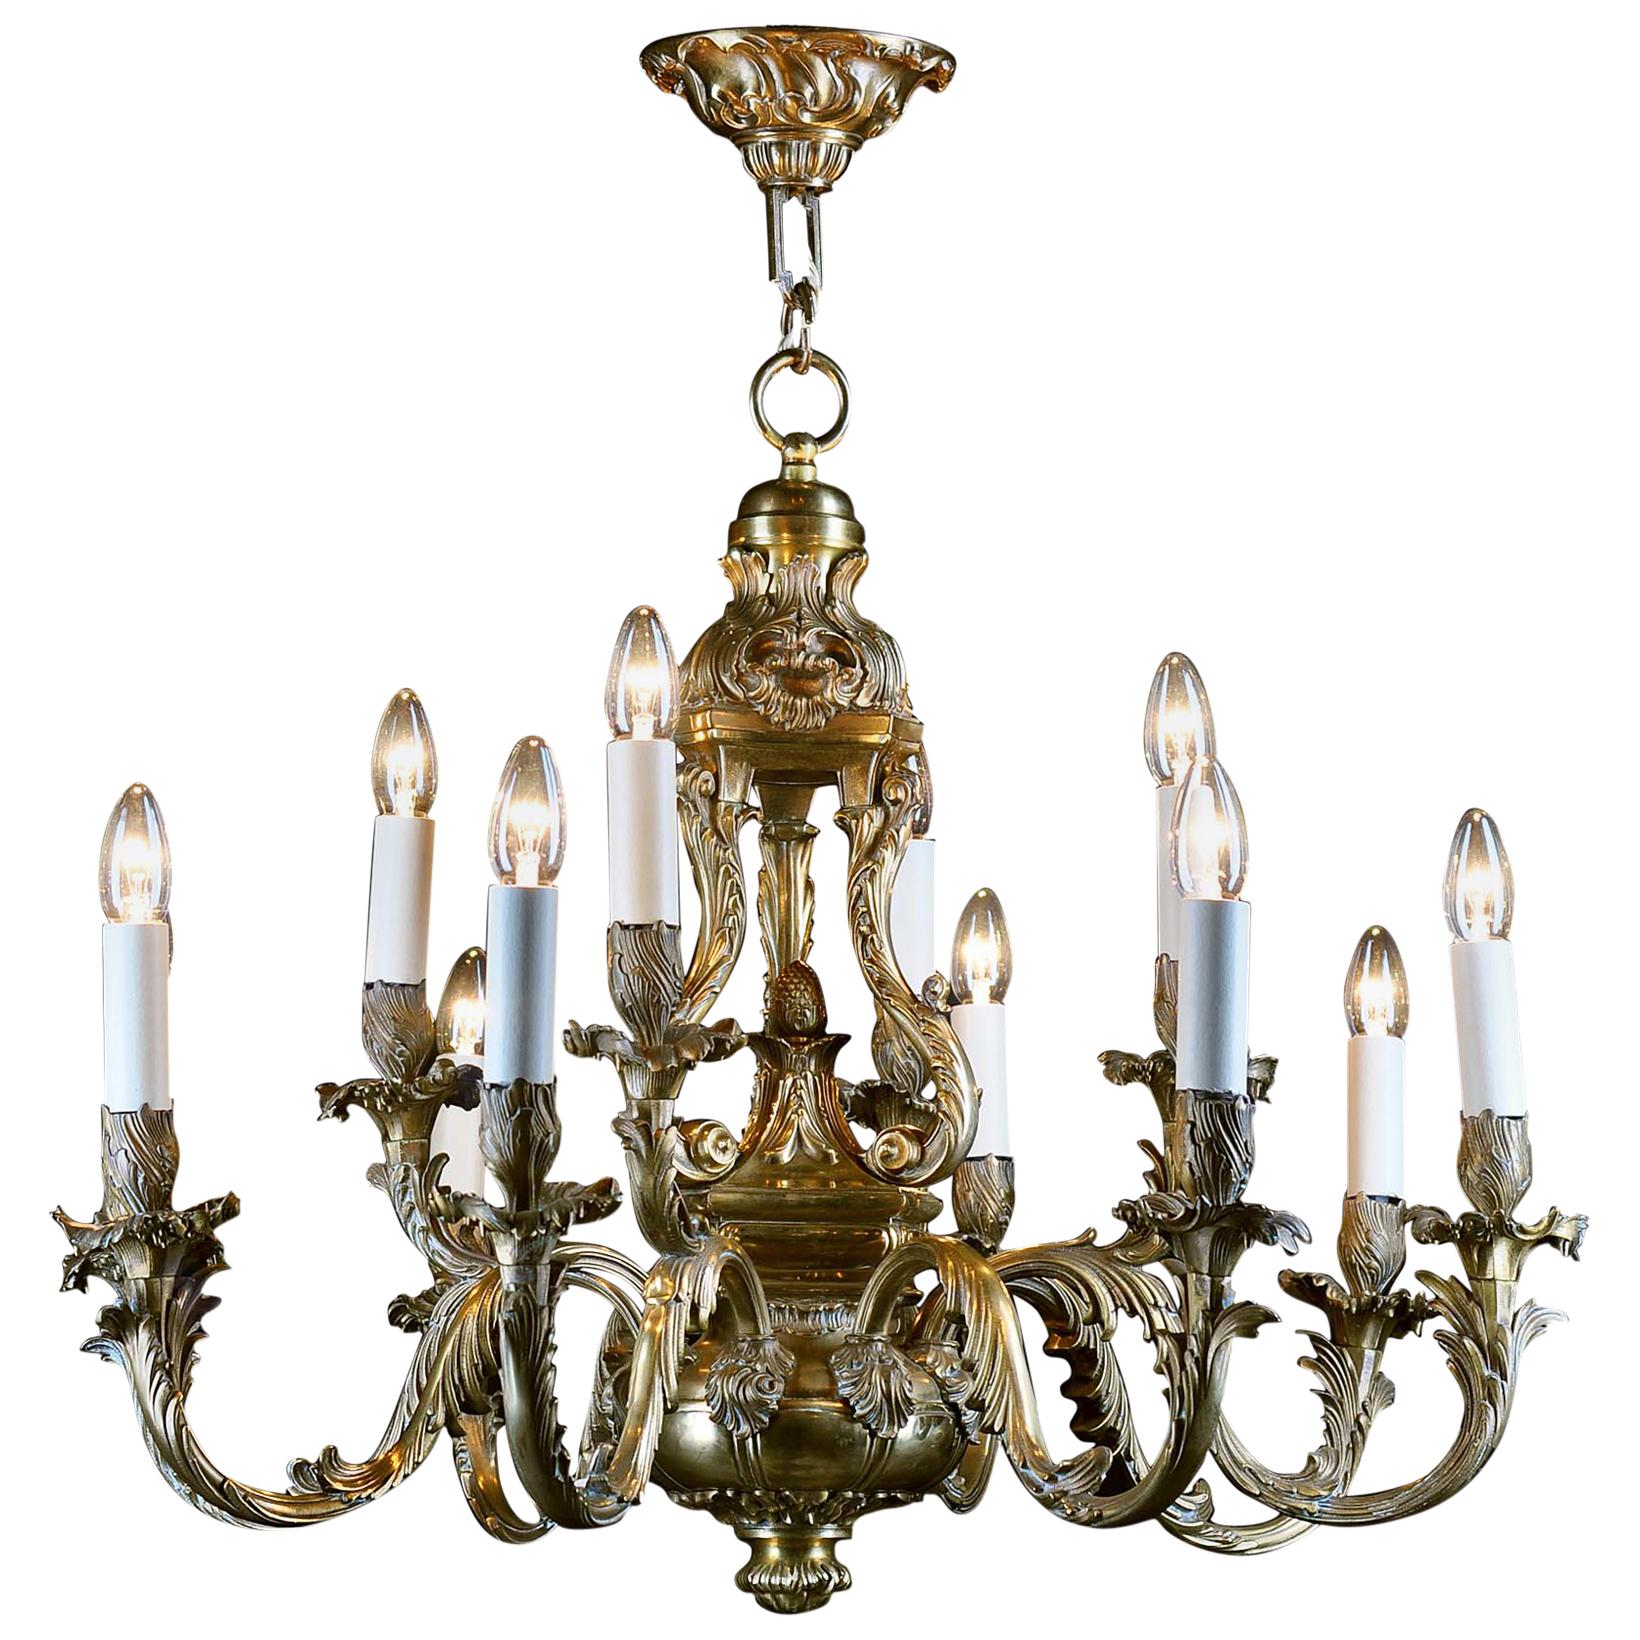 Large Bronze Chandelier in the Rococo Manner